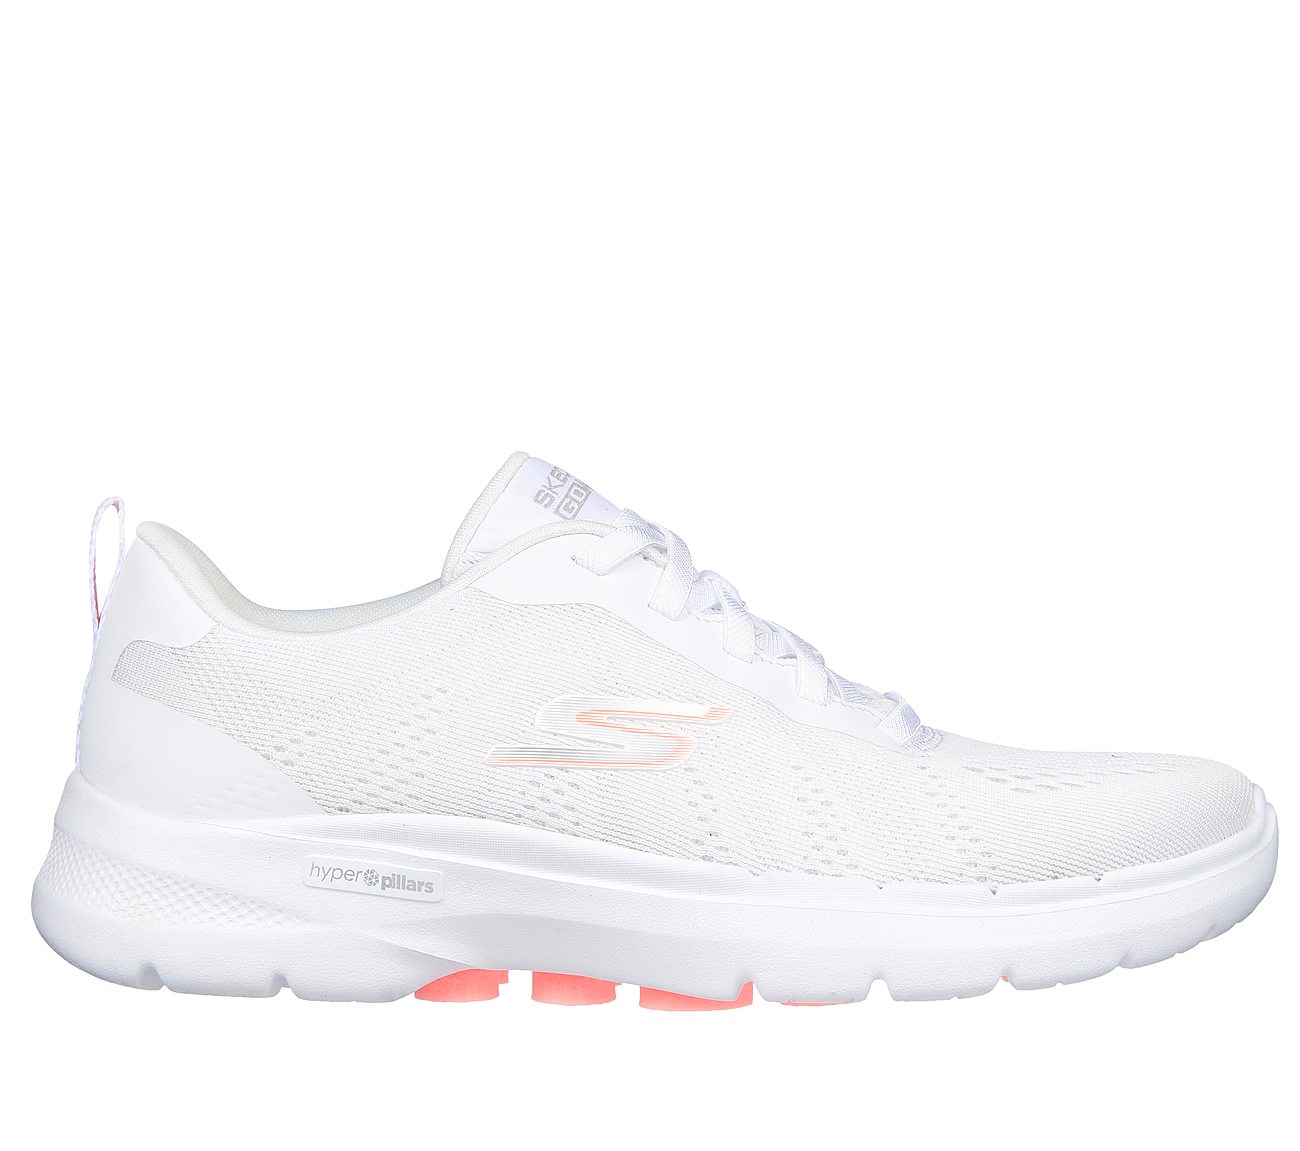 GO WALK 6, WHITE/PINK Footwear Lateral View